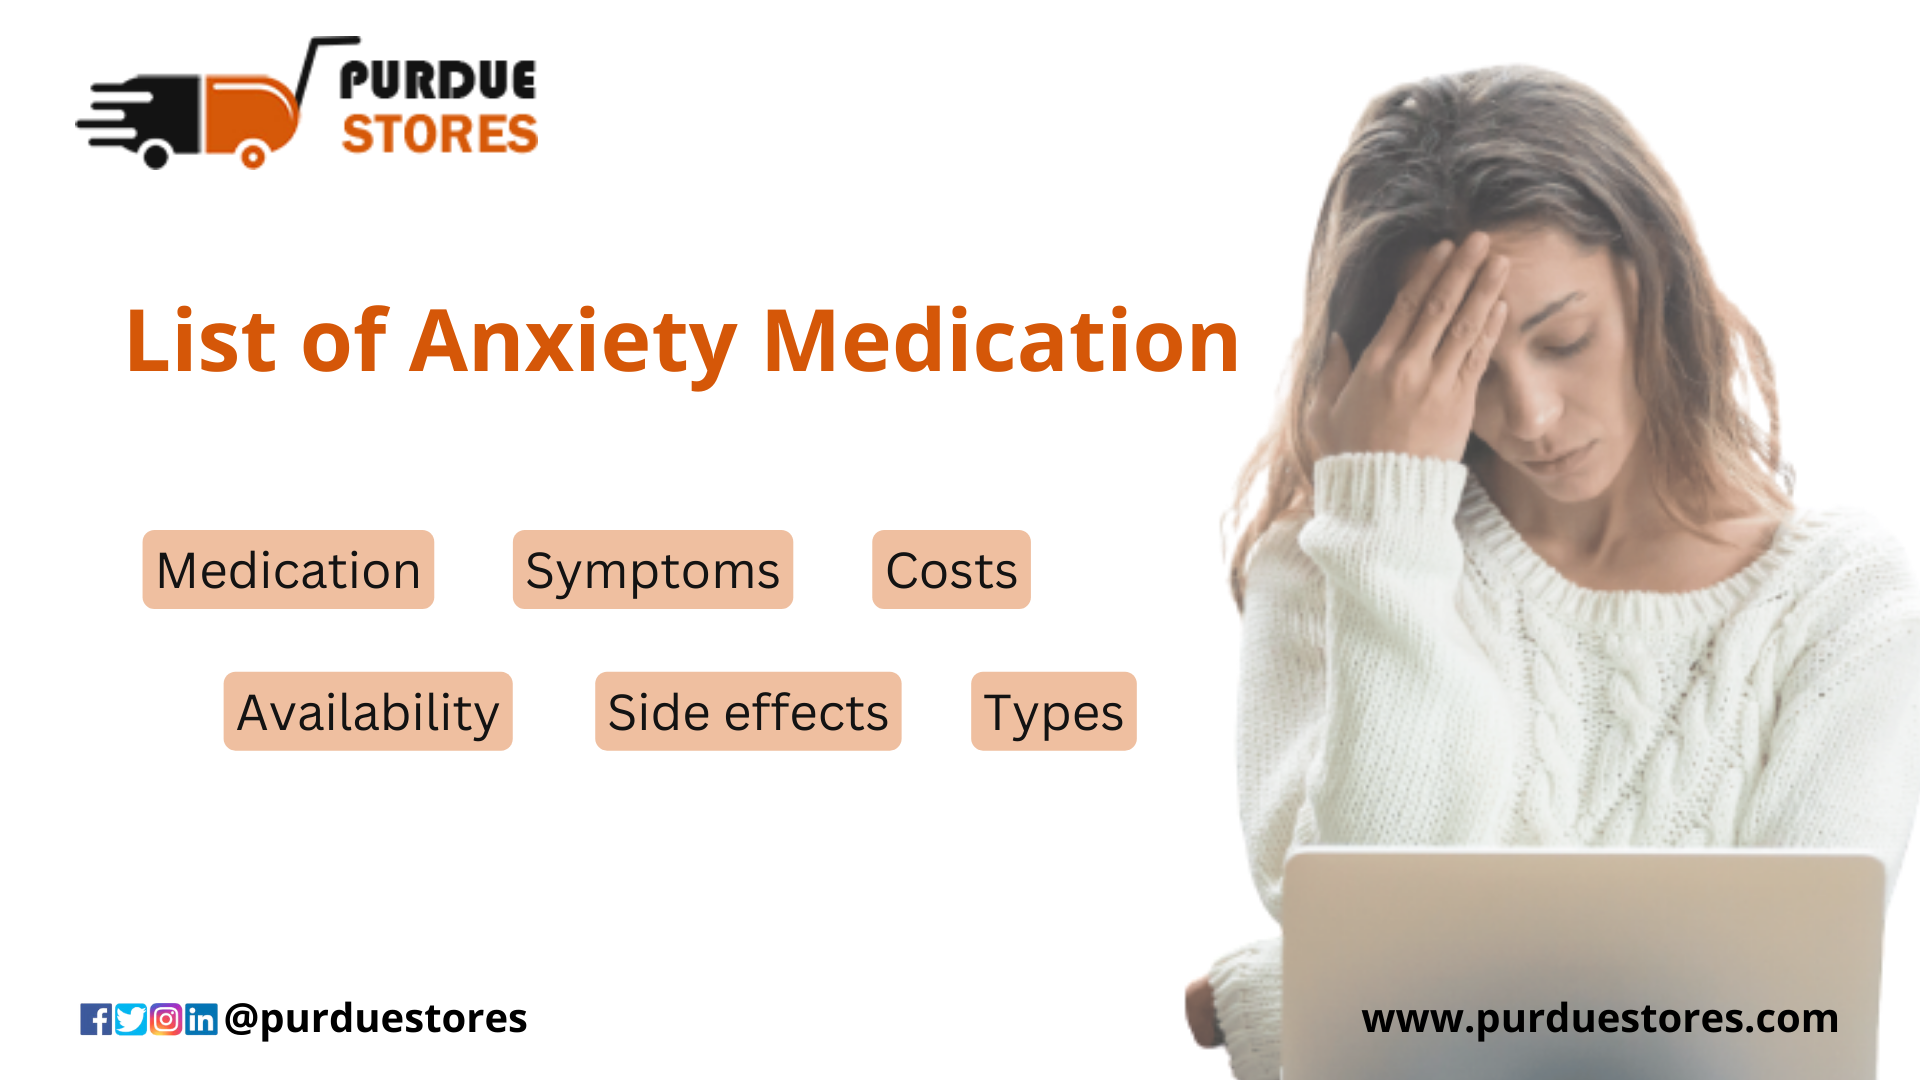 List of anxiety medication: Cost & Side effects